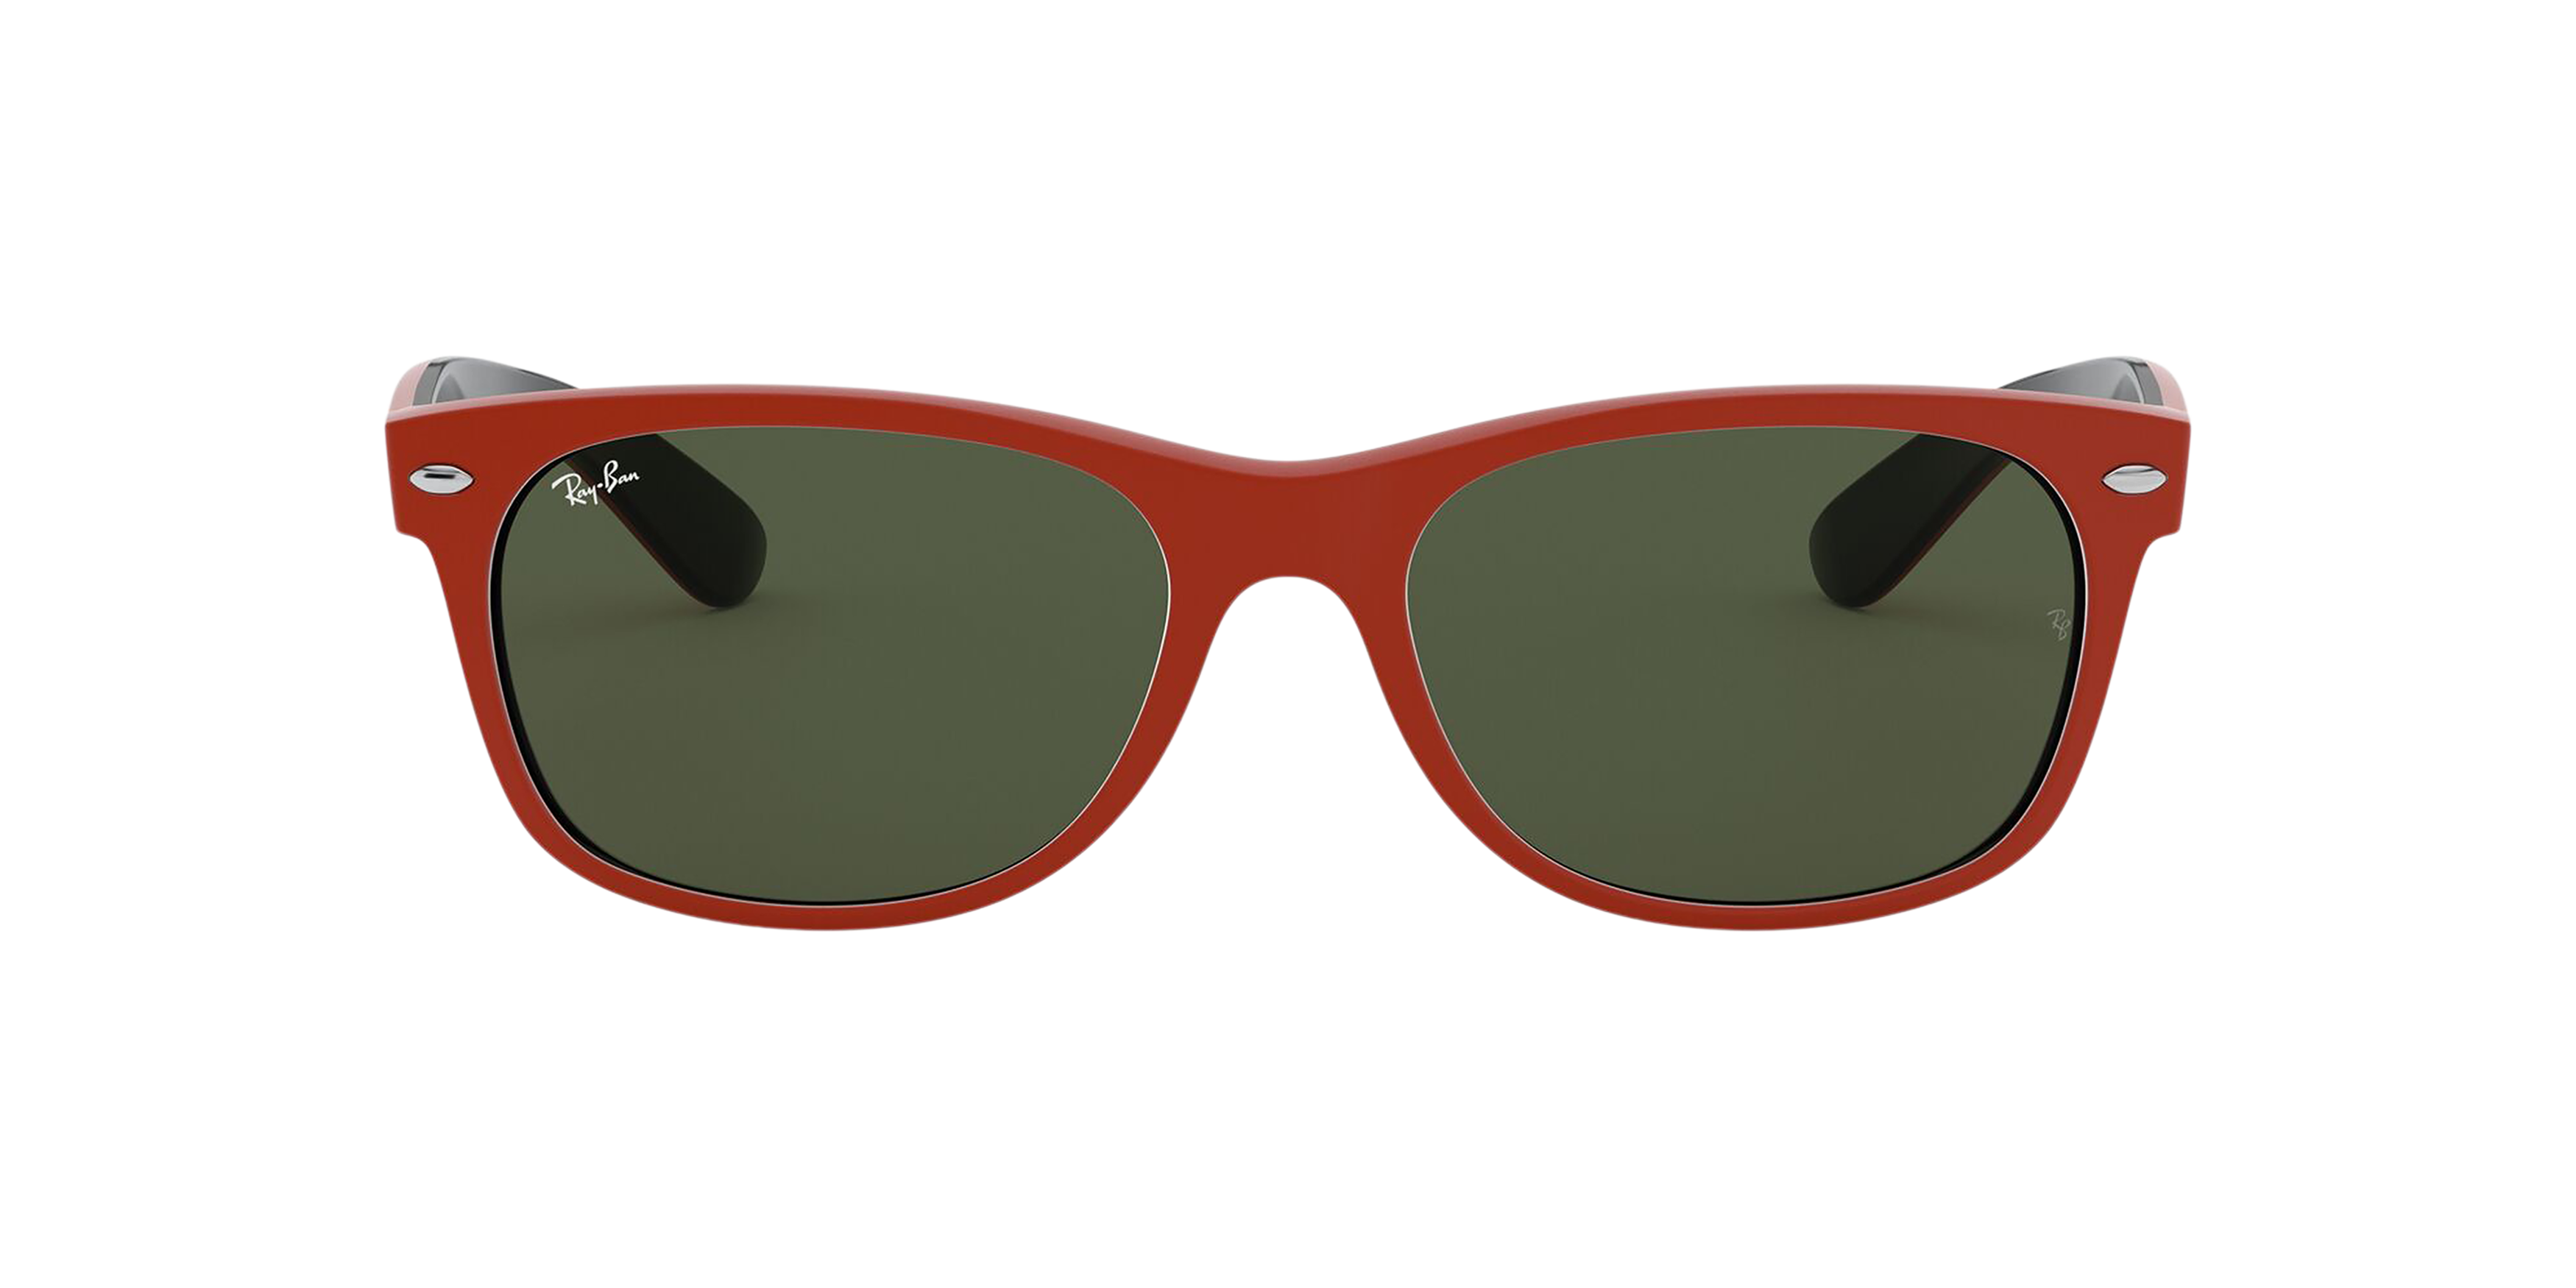 [products.image.front] Ray-Ban New Wayfarer Color Mix RB2132 646631